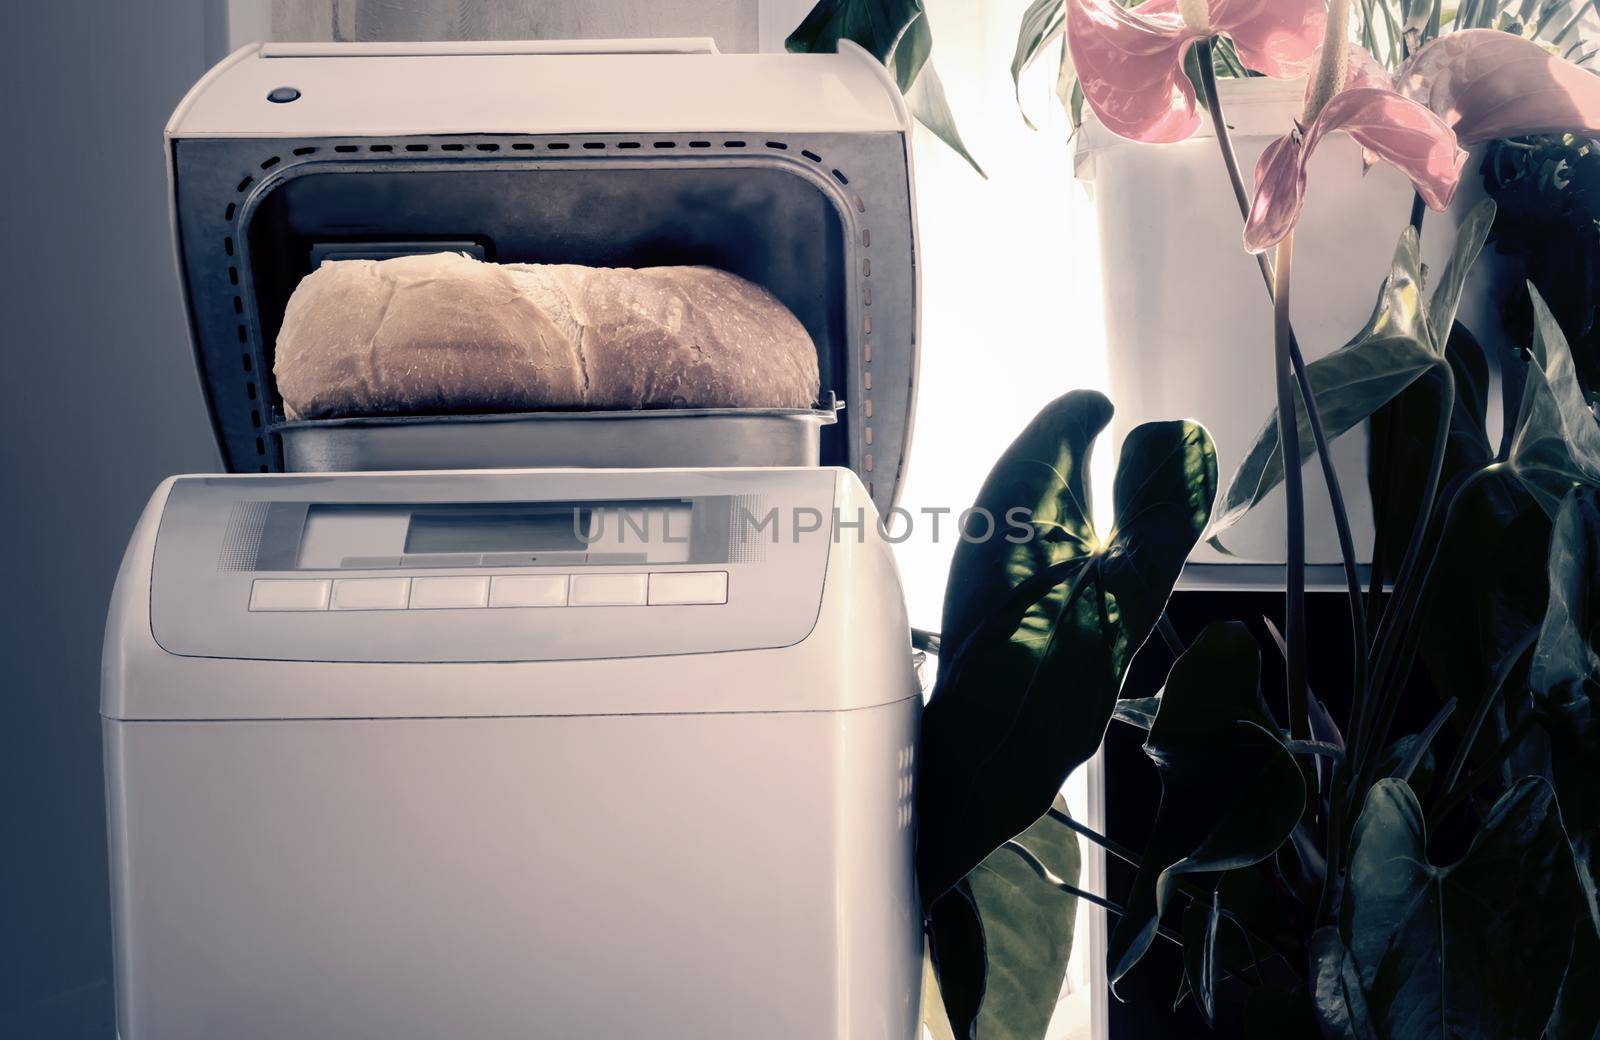 Household appliances: electric oven for baking bread at home. The white bread baked in it.